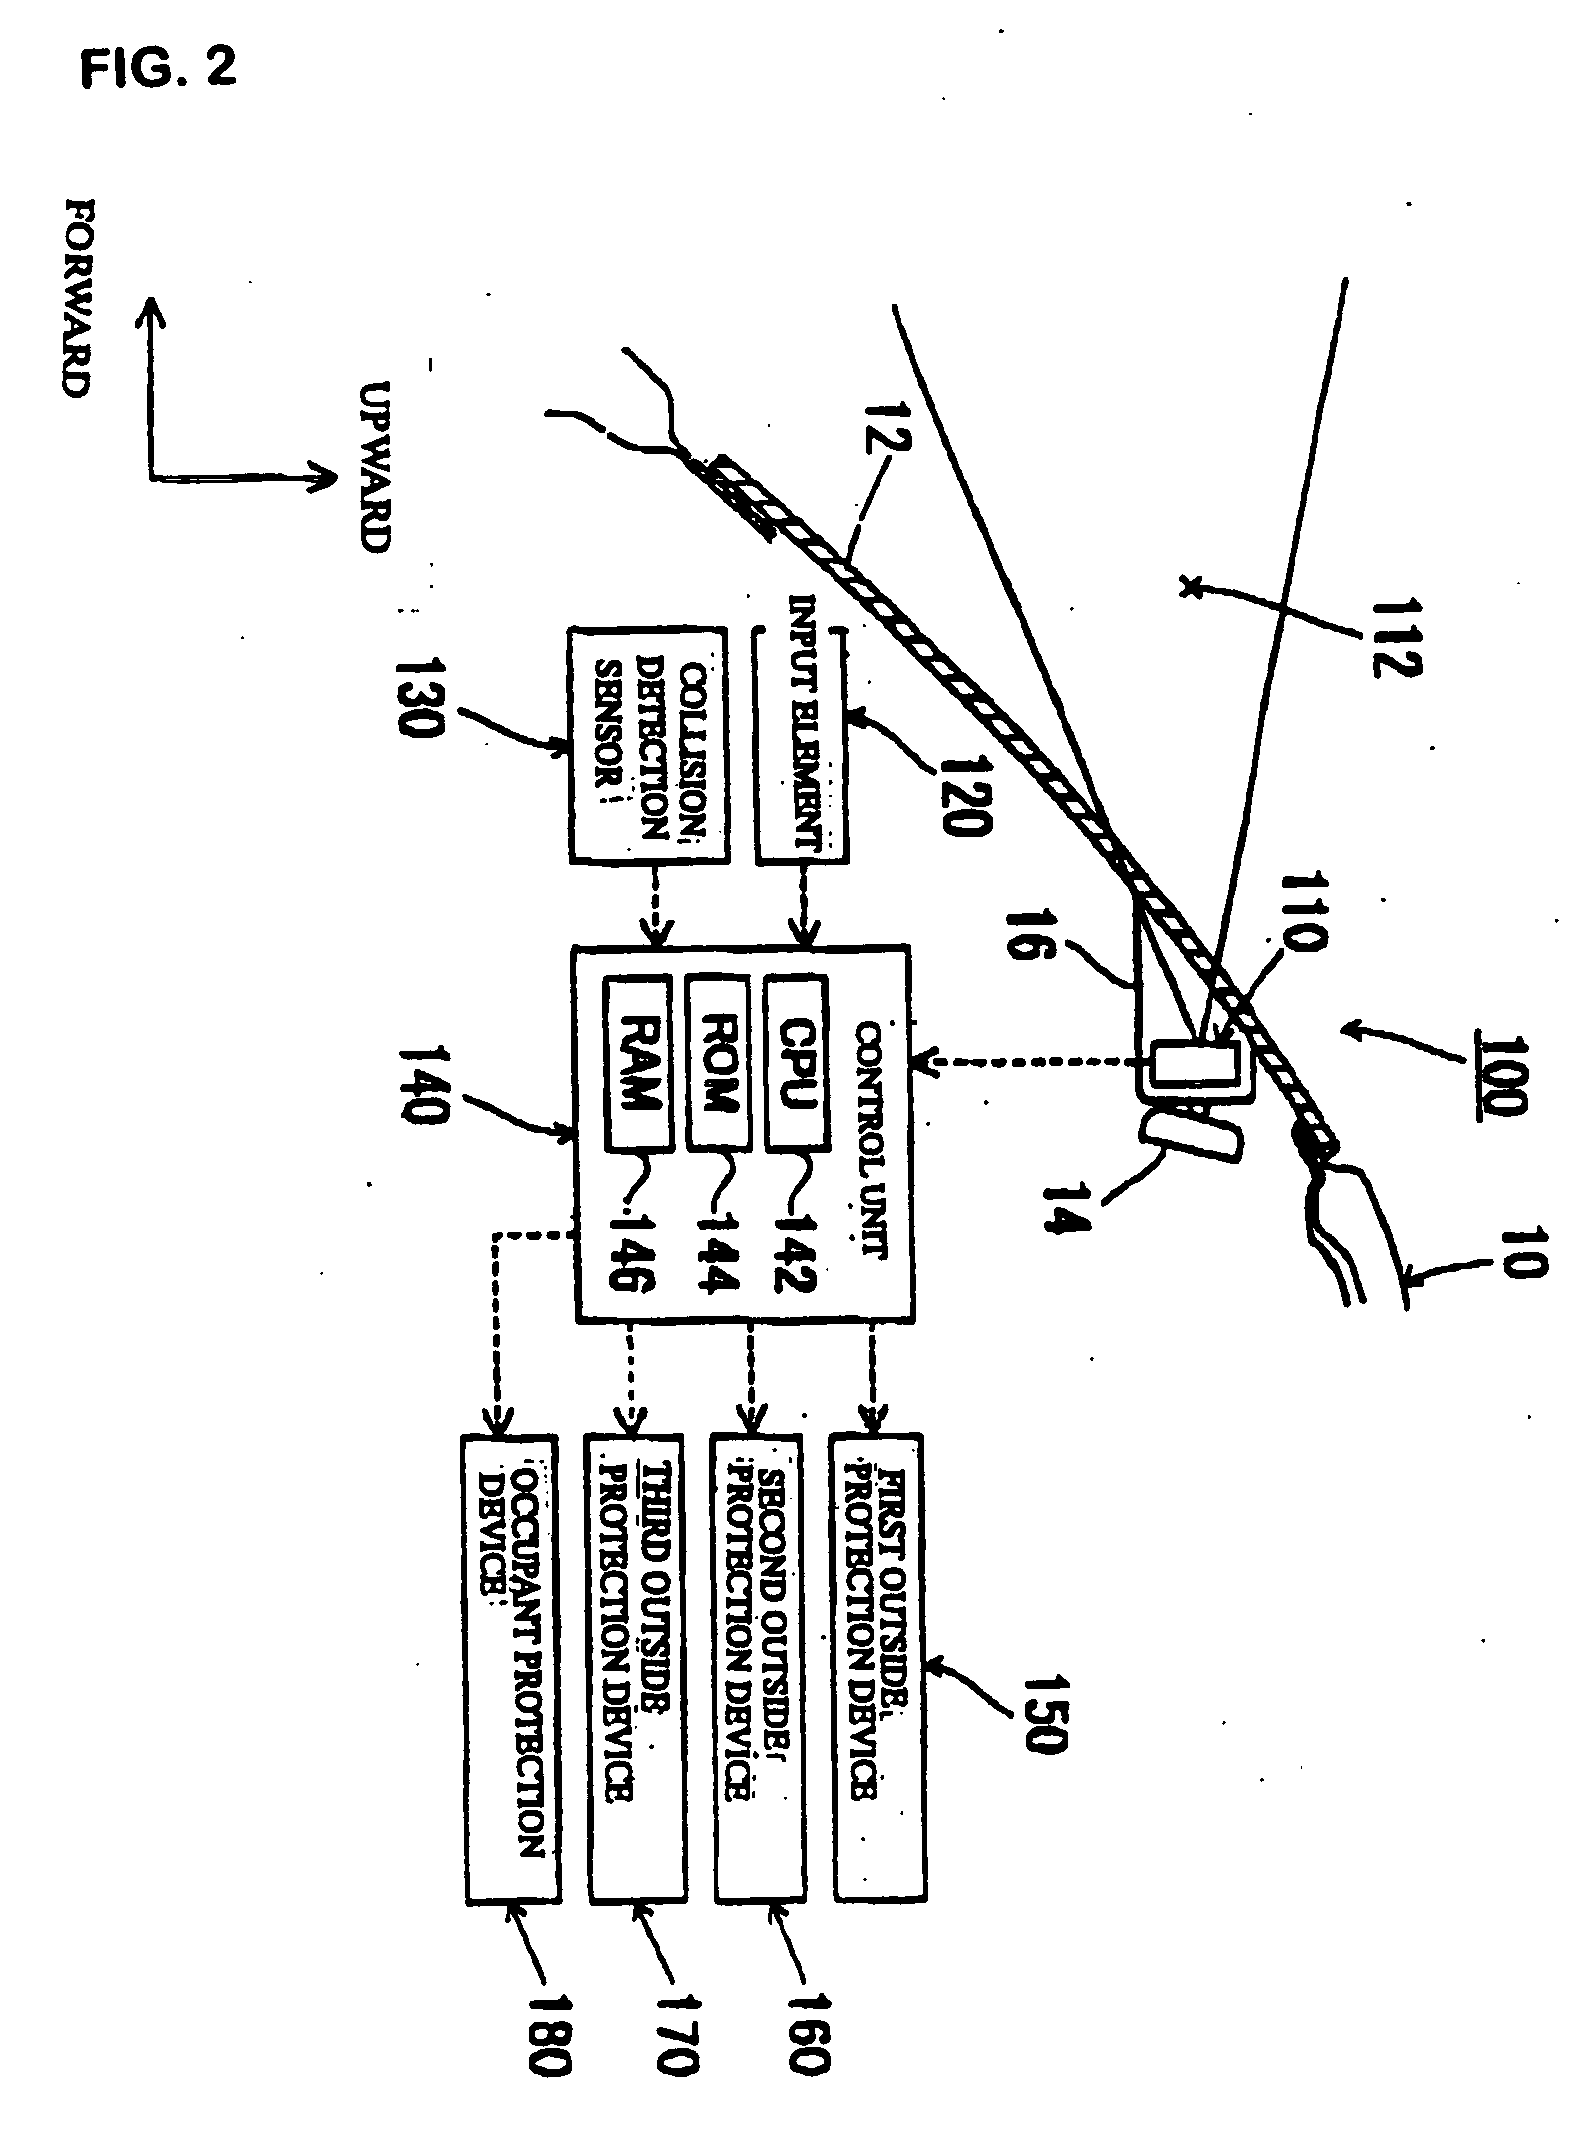 Object detection system, protection system, and vehicle